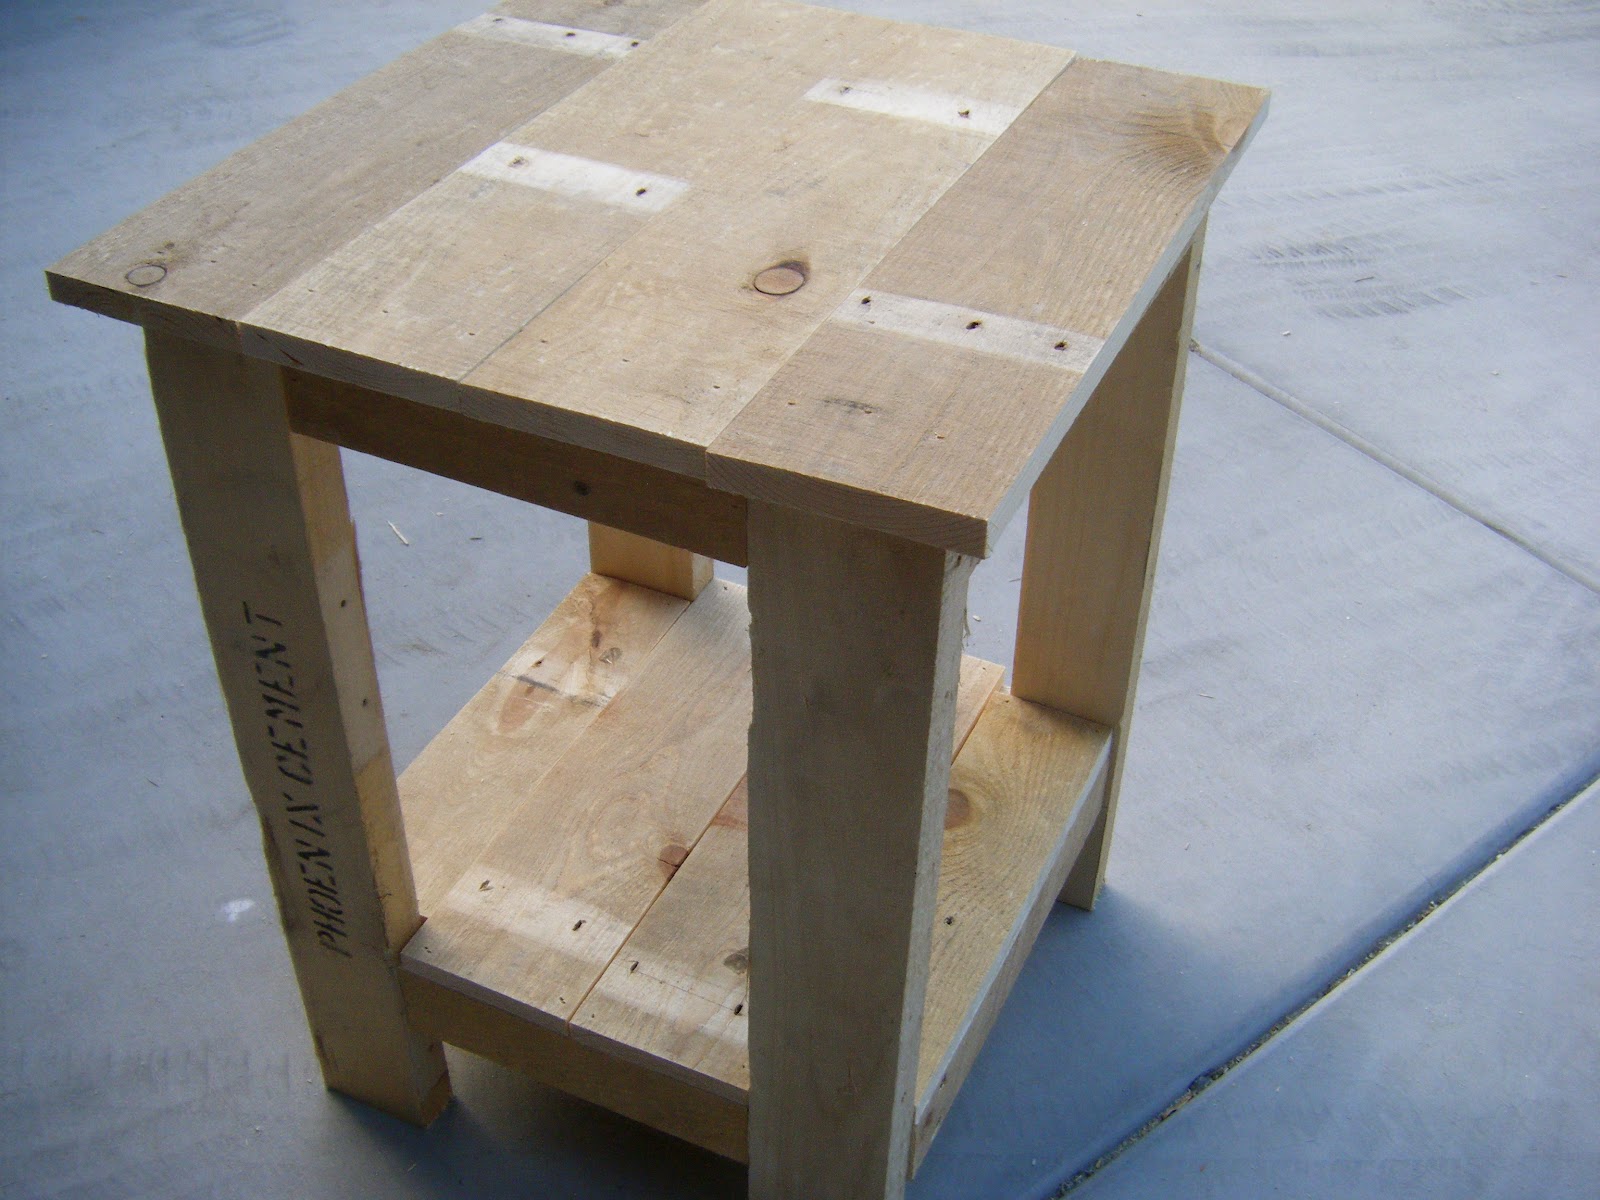 Woodworking pallet end table plans PDF Free Download